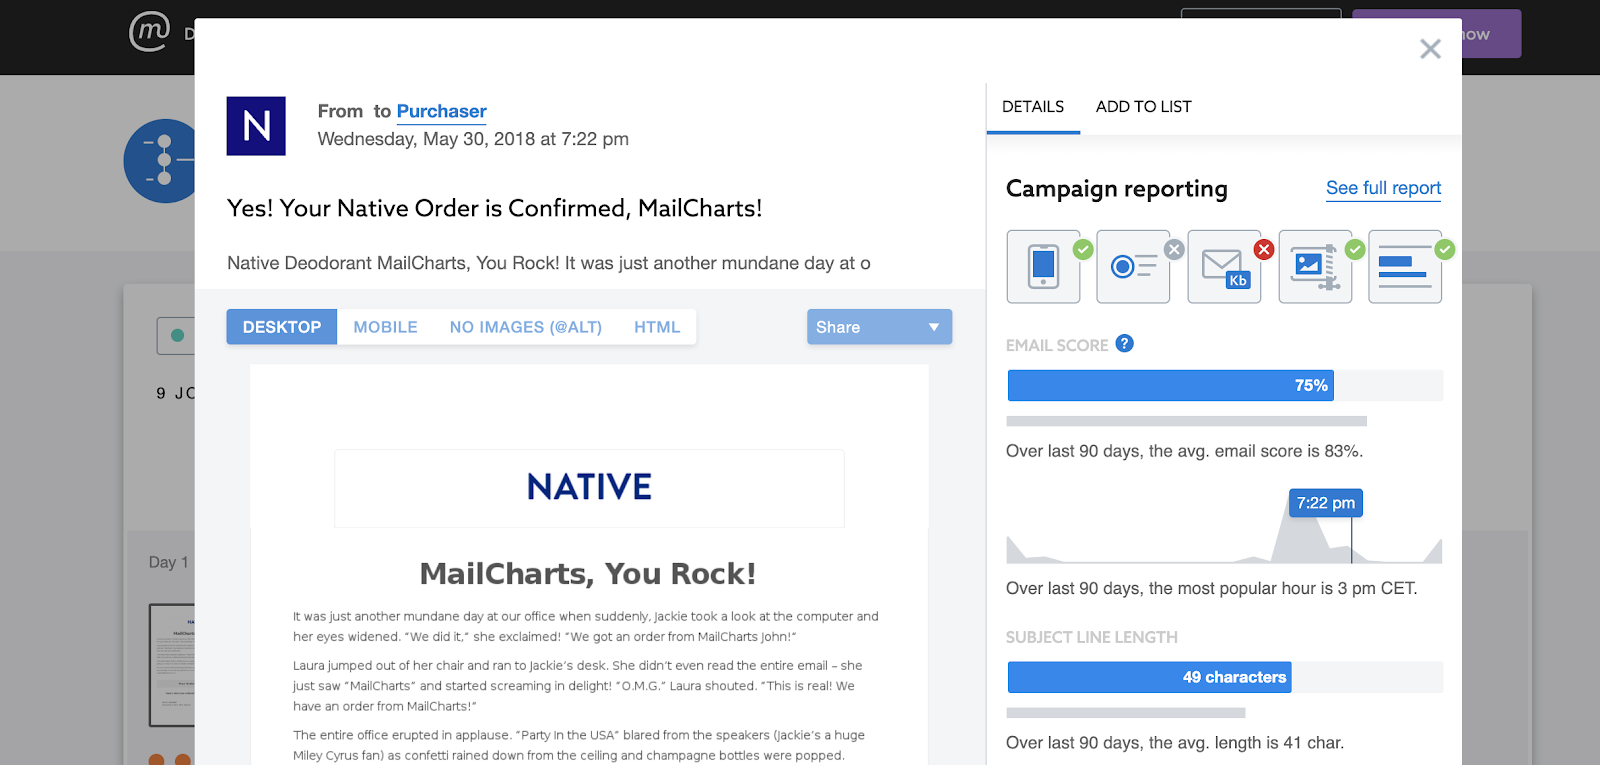 The customer journey within MailCharts